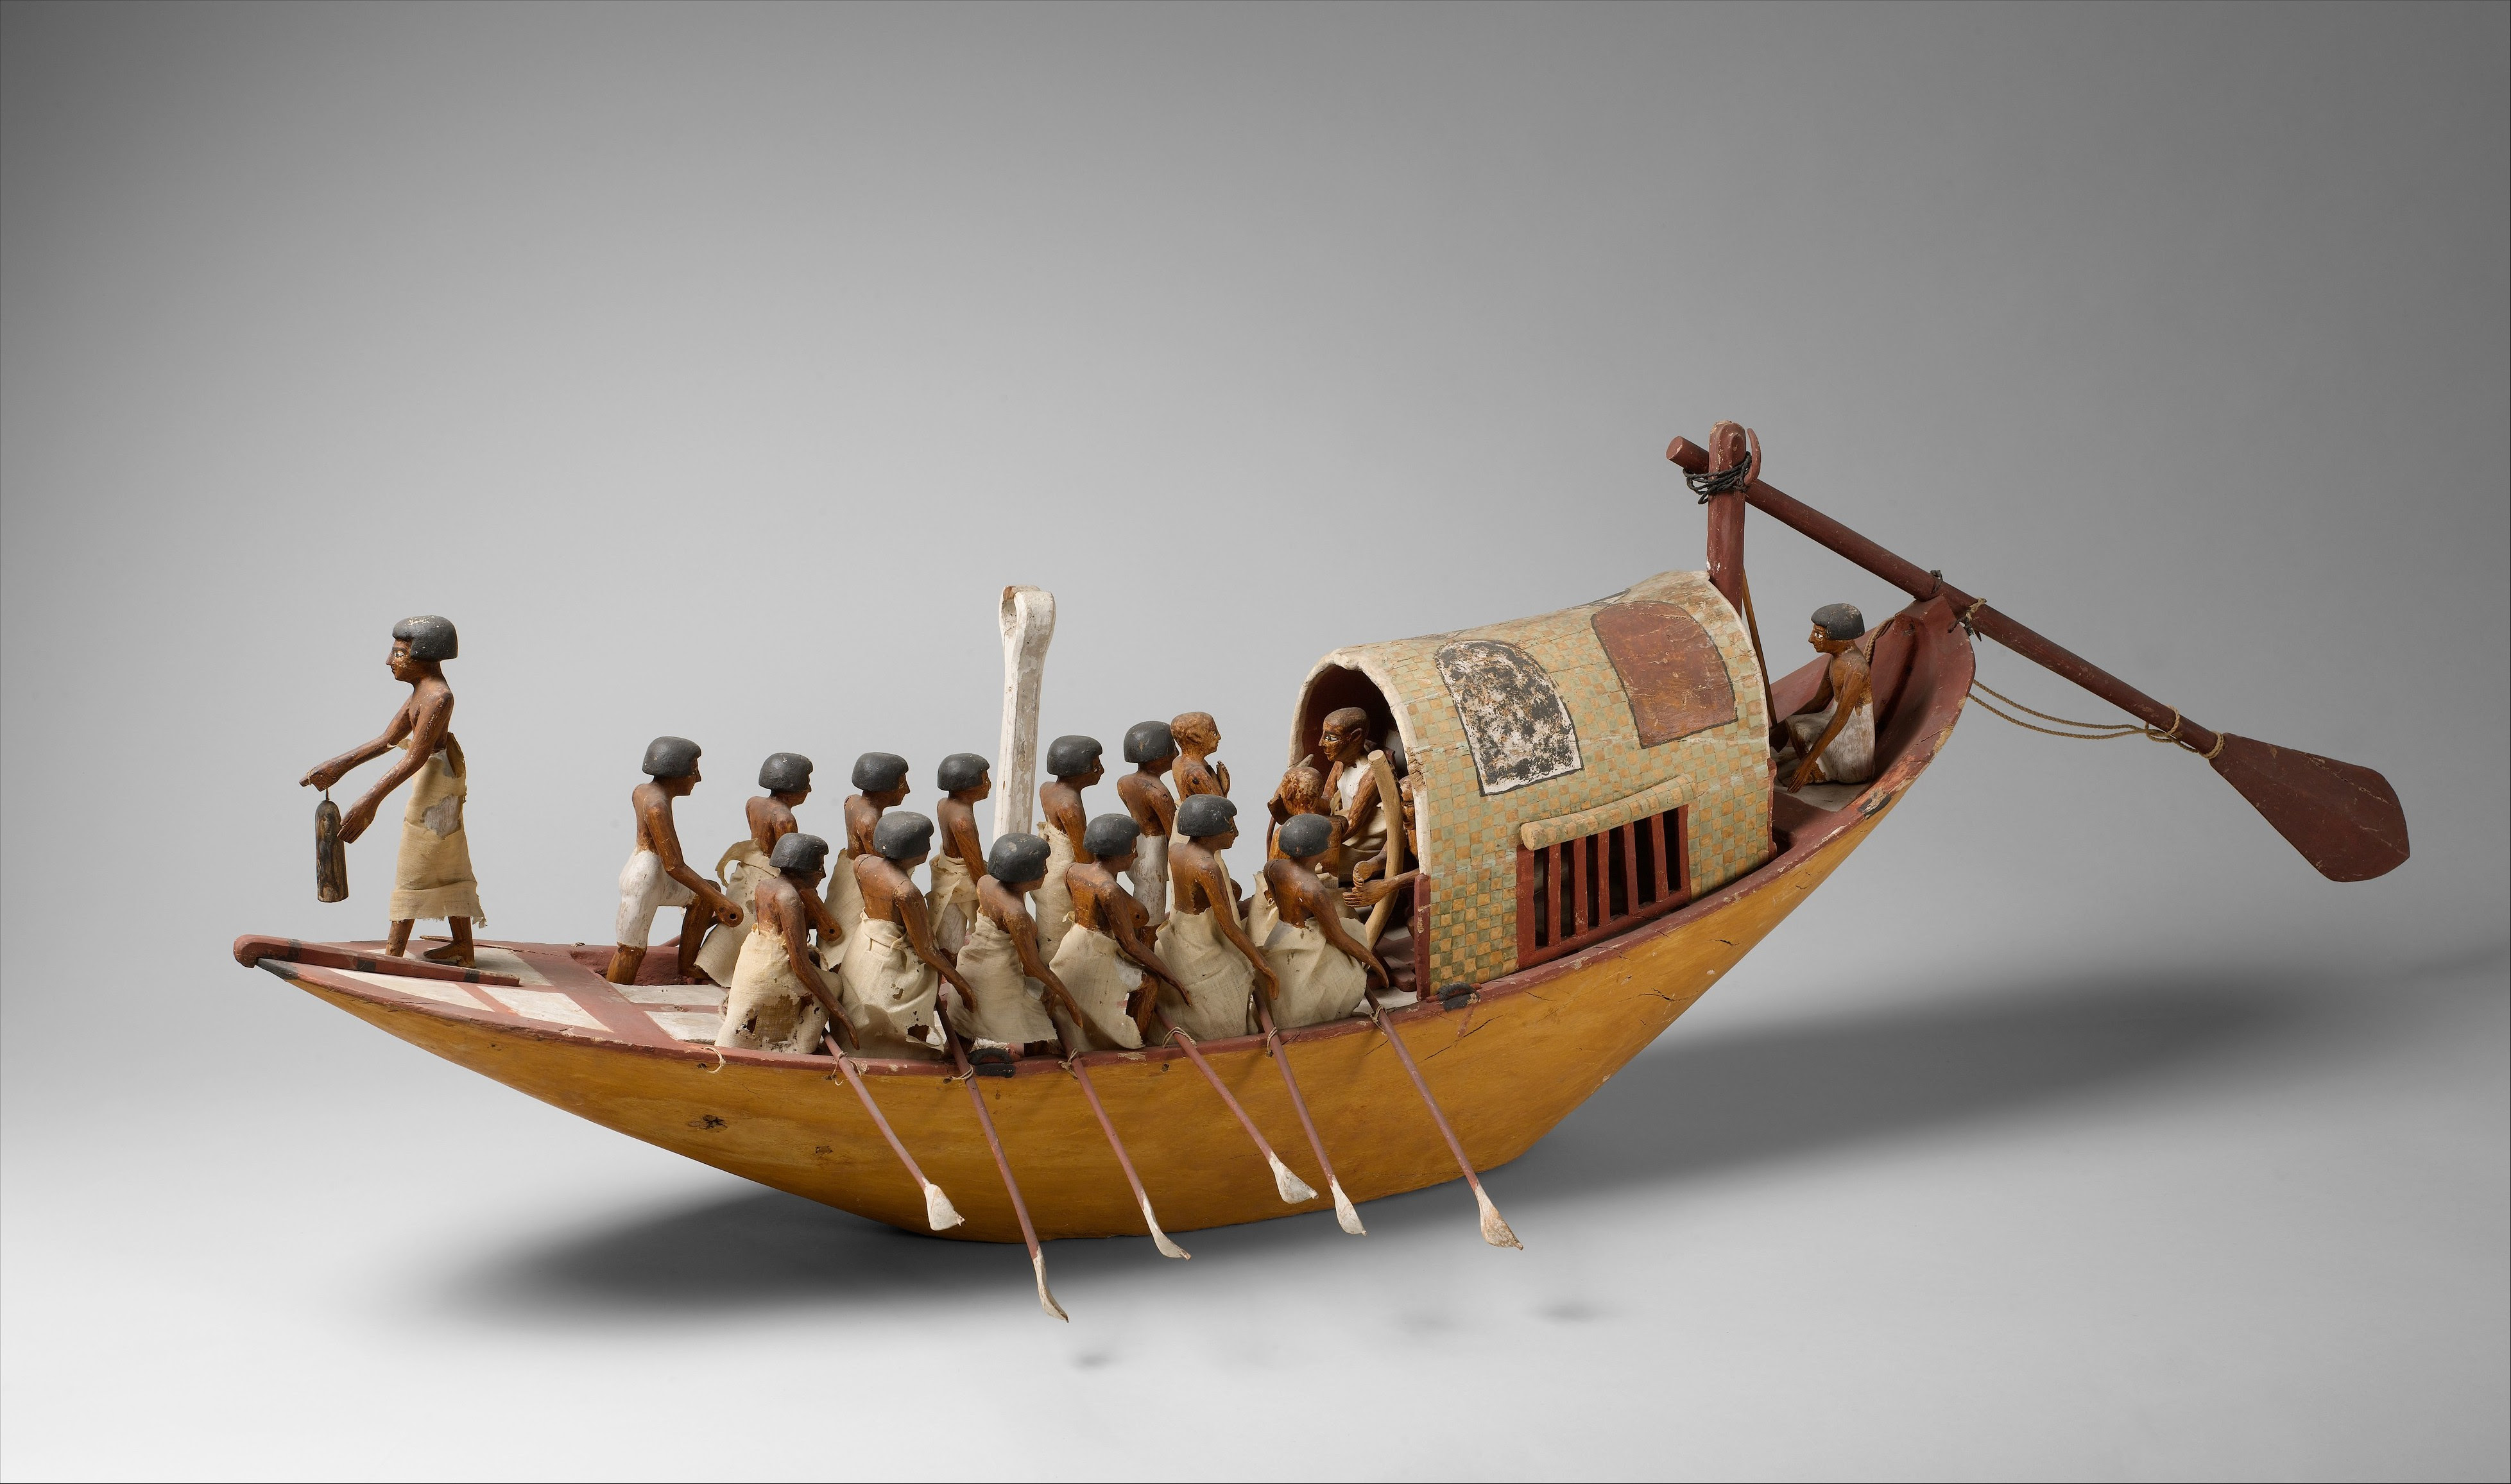 Historic sculpture of a traveling boat being rowed. Rowing art